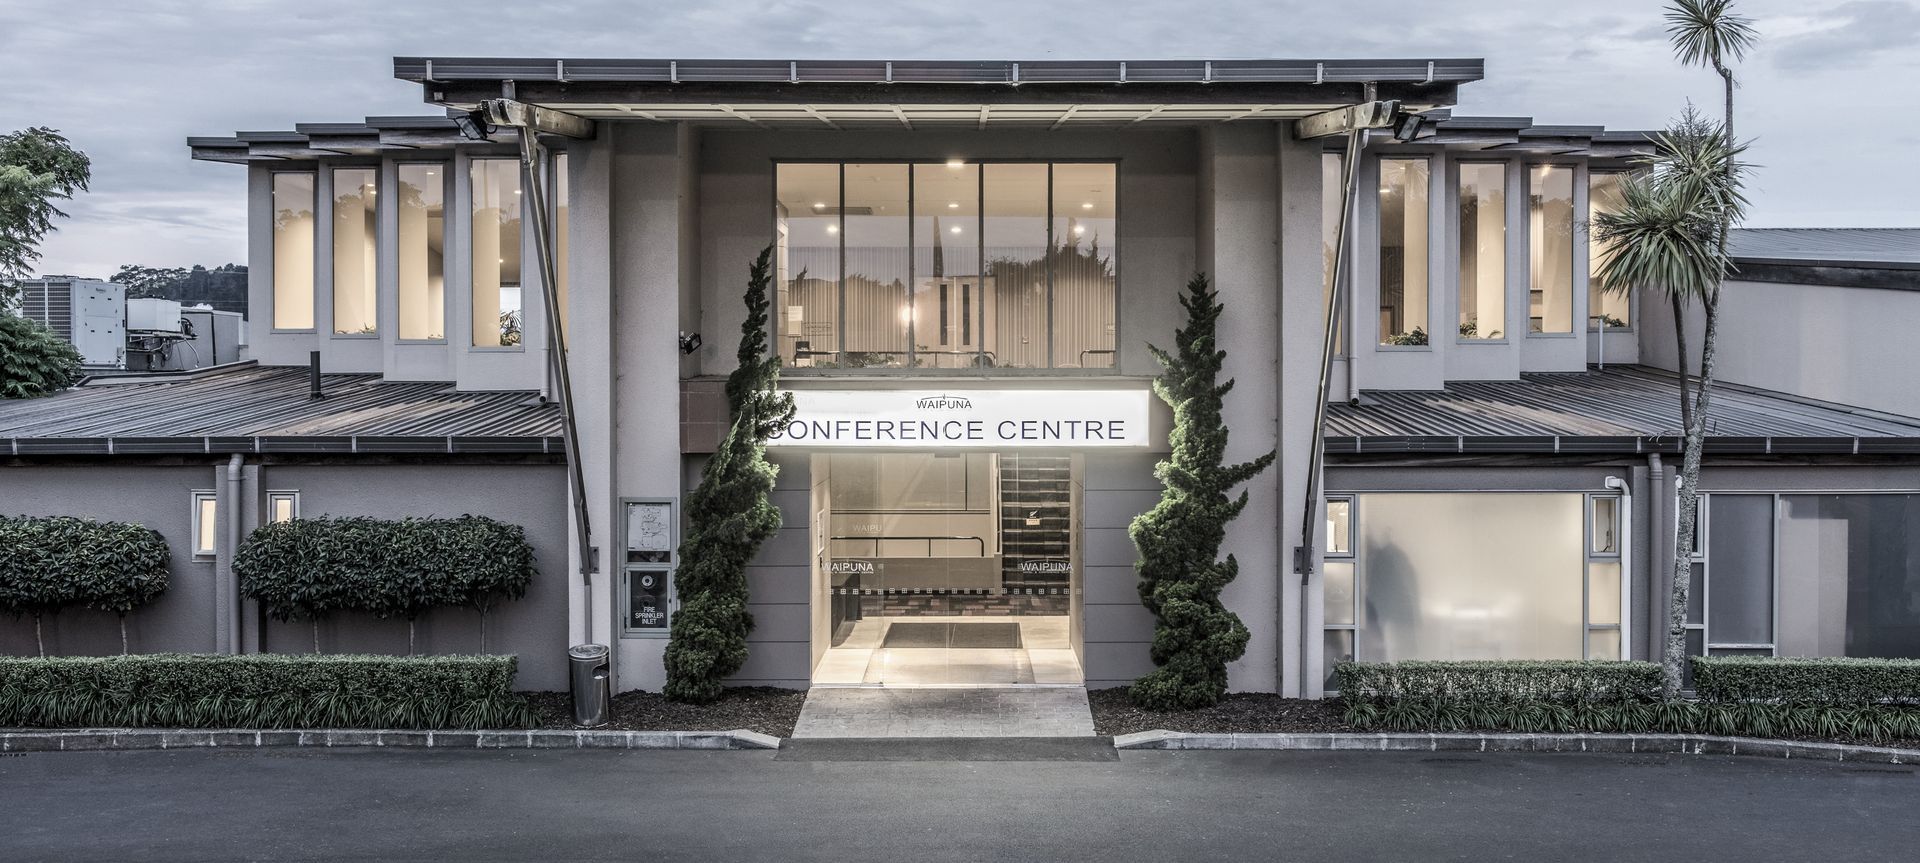 Waipuna Hotel and Conference Centre banner